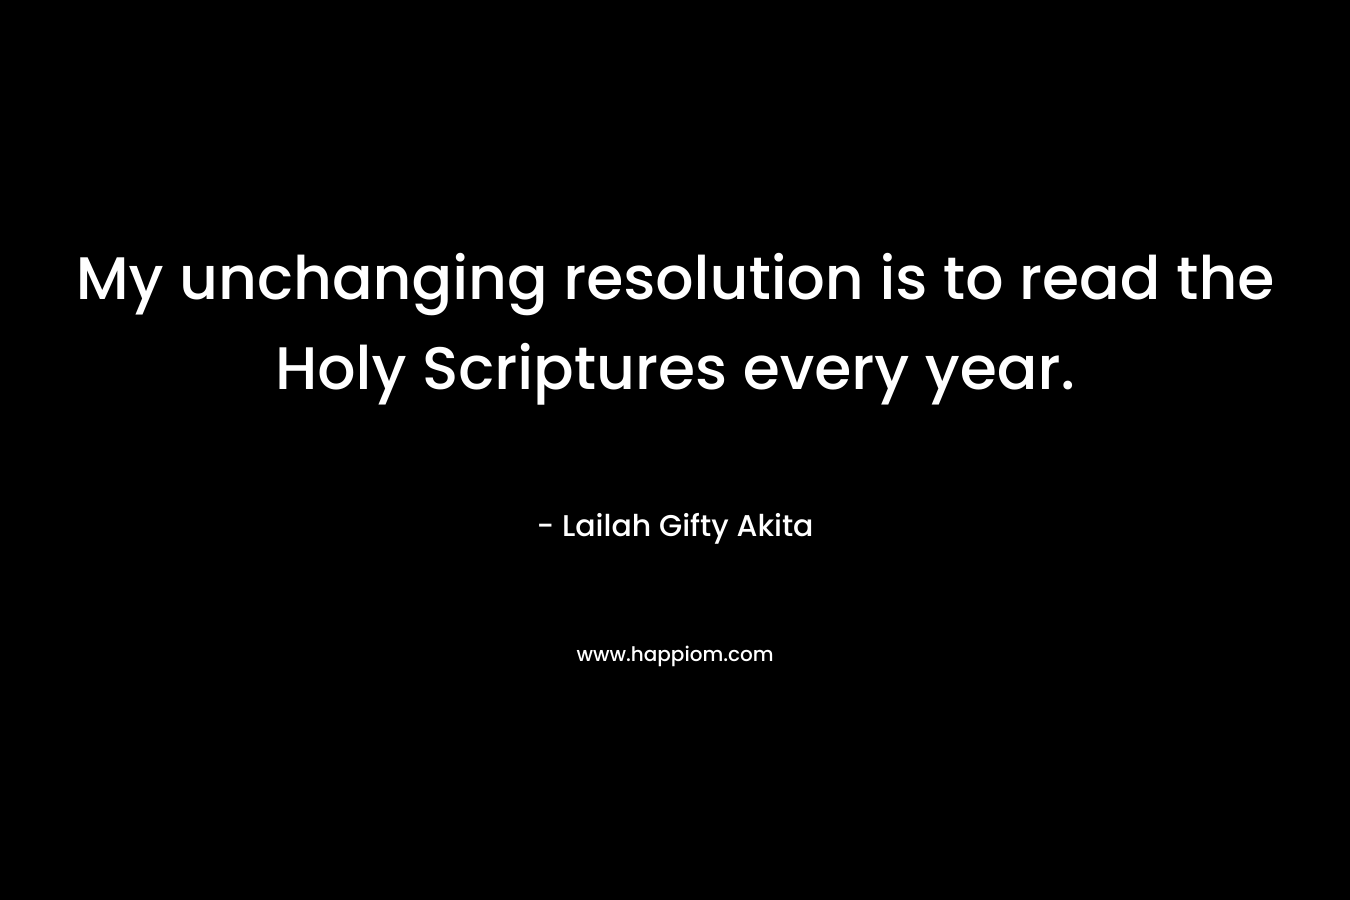 My unchanging resolution is to read the Holy Scriptures every year. – Lailah Gifty Akita